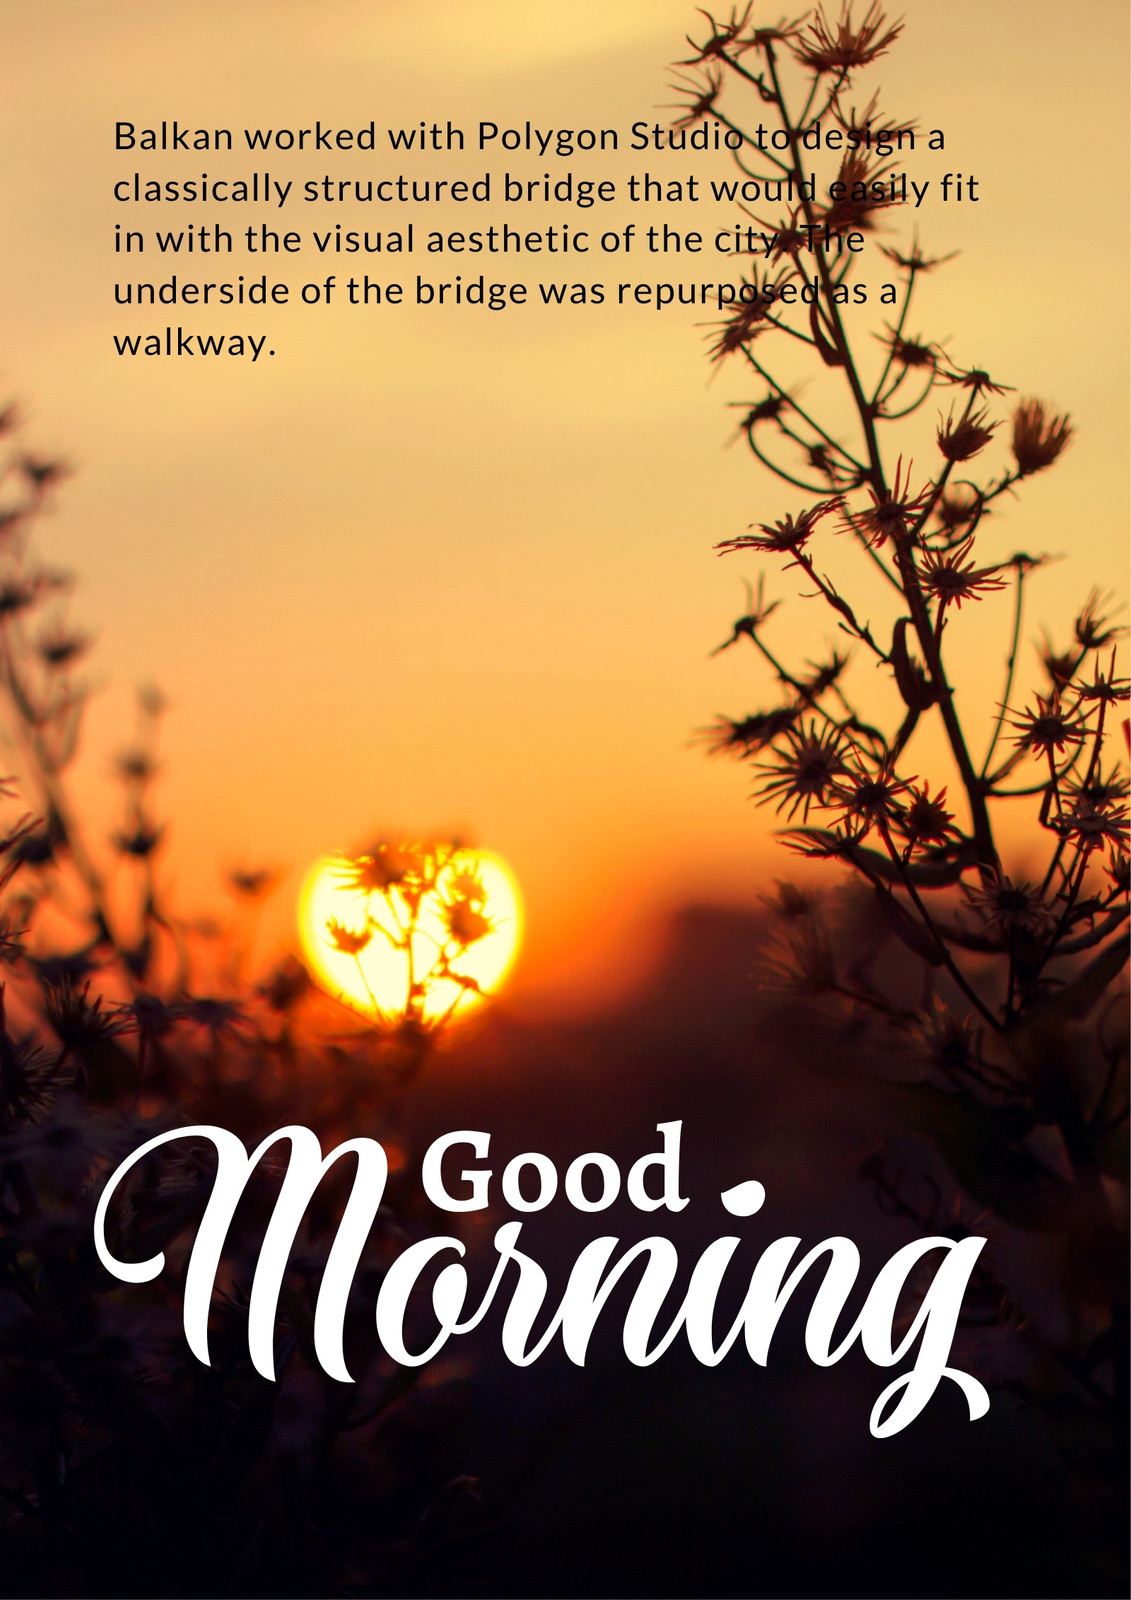 Page 10 - Free and customizable sunrise templates